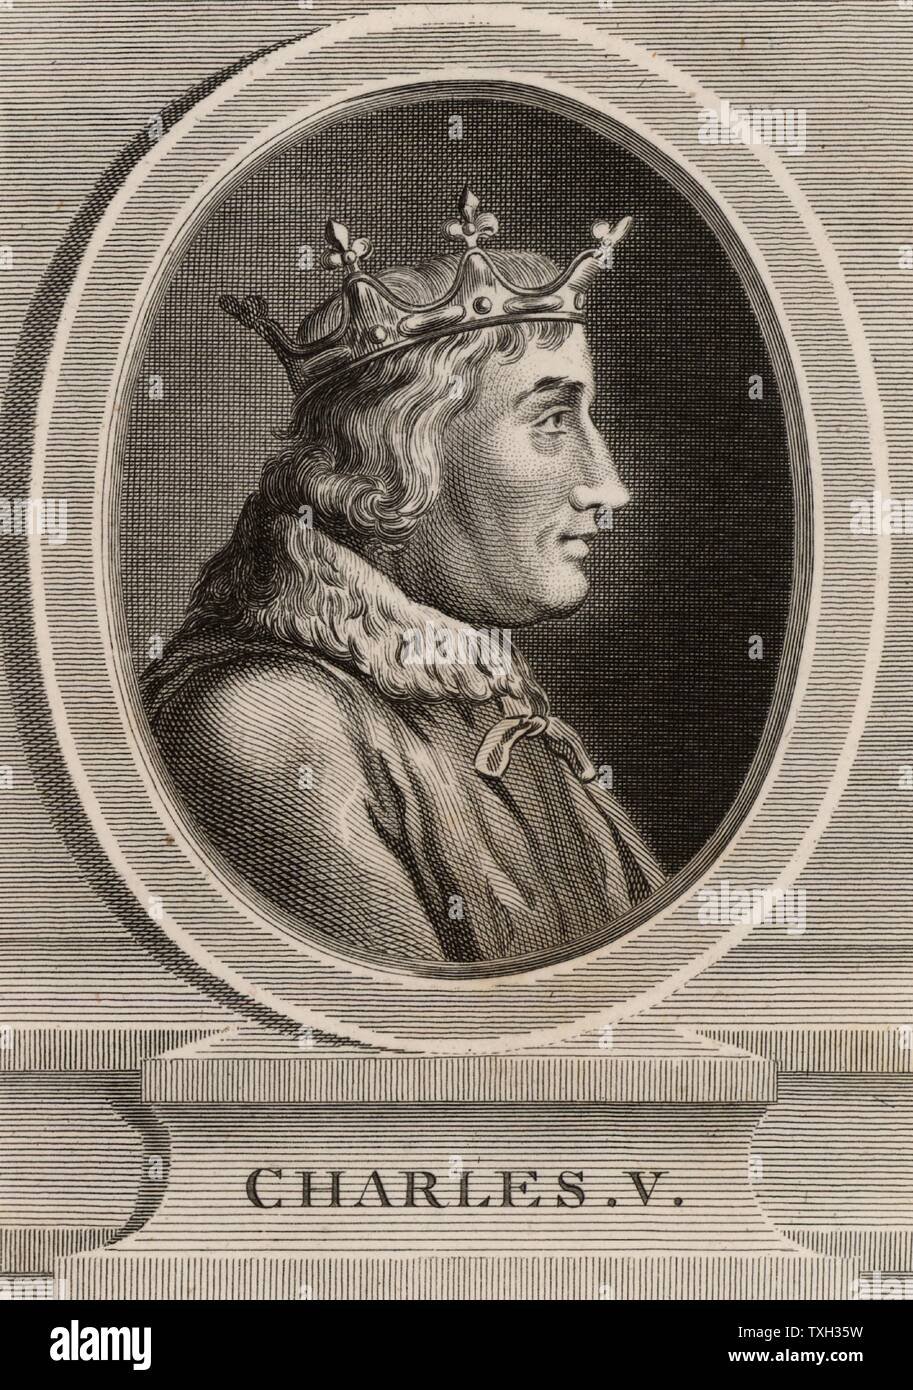 Charles V, the Wise (1338-80) king of France from 1364. Regent during father's (John or Jean II) captivity in England after the Battle of Poitiers, 1356, during the Hundred Years War.  He regained most of territory lost to the English.  Copperplate engraving 1793. Stock Photo